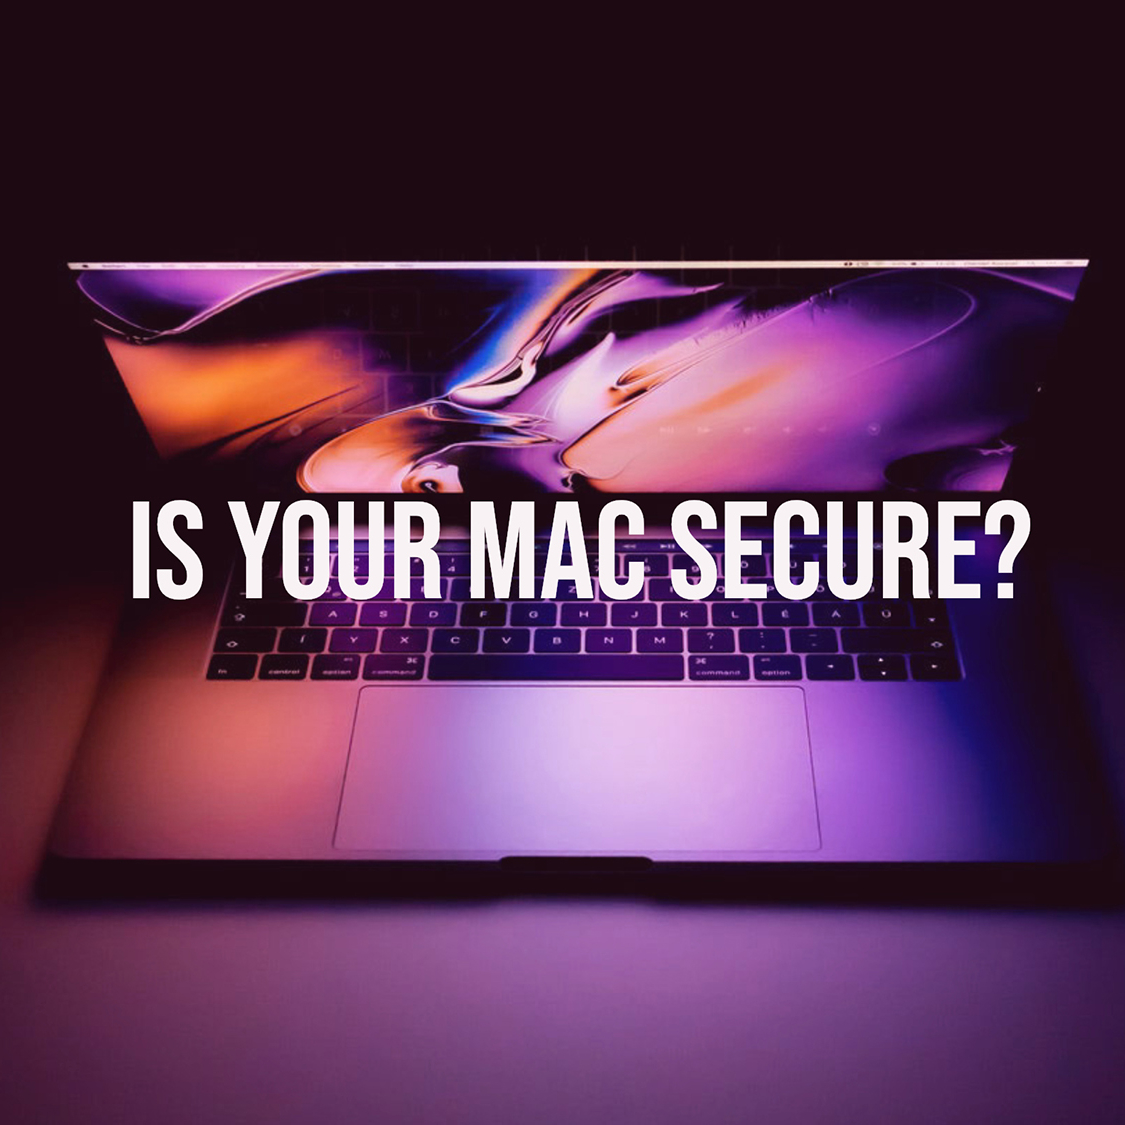 is your mac secure? image